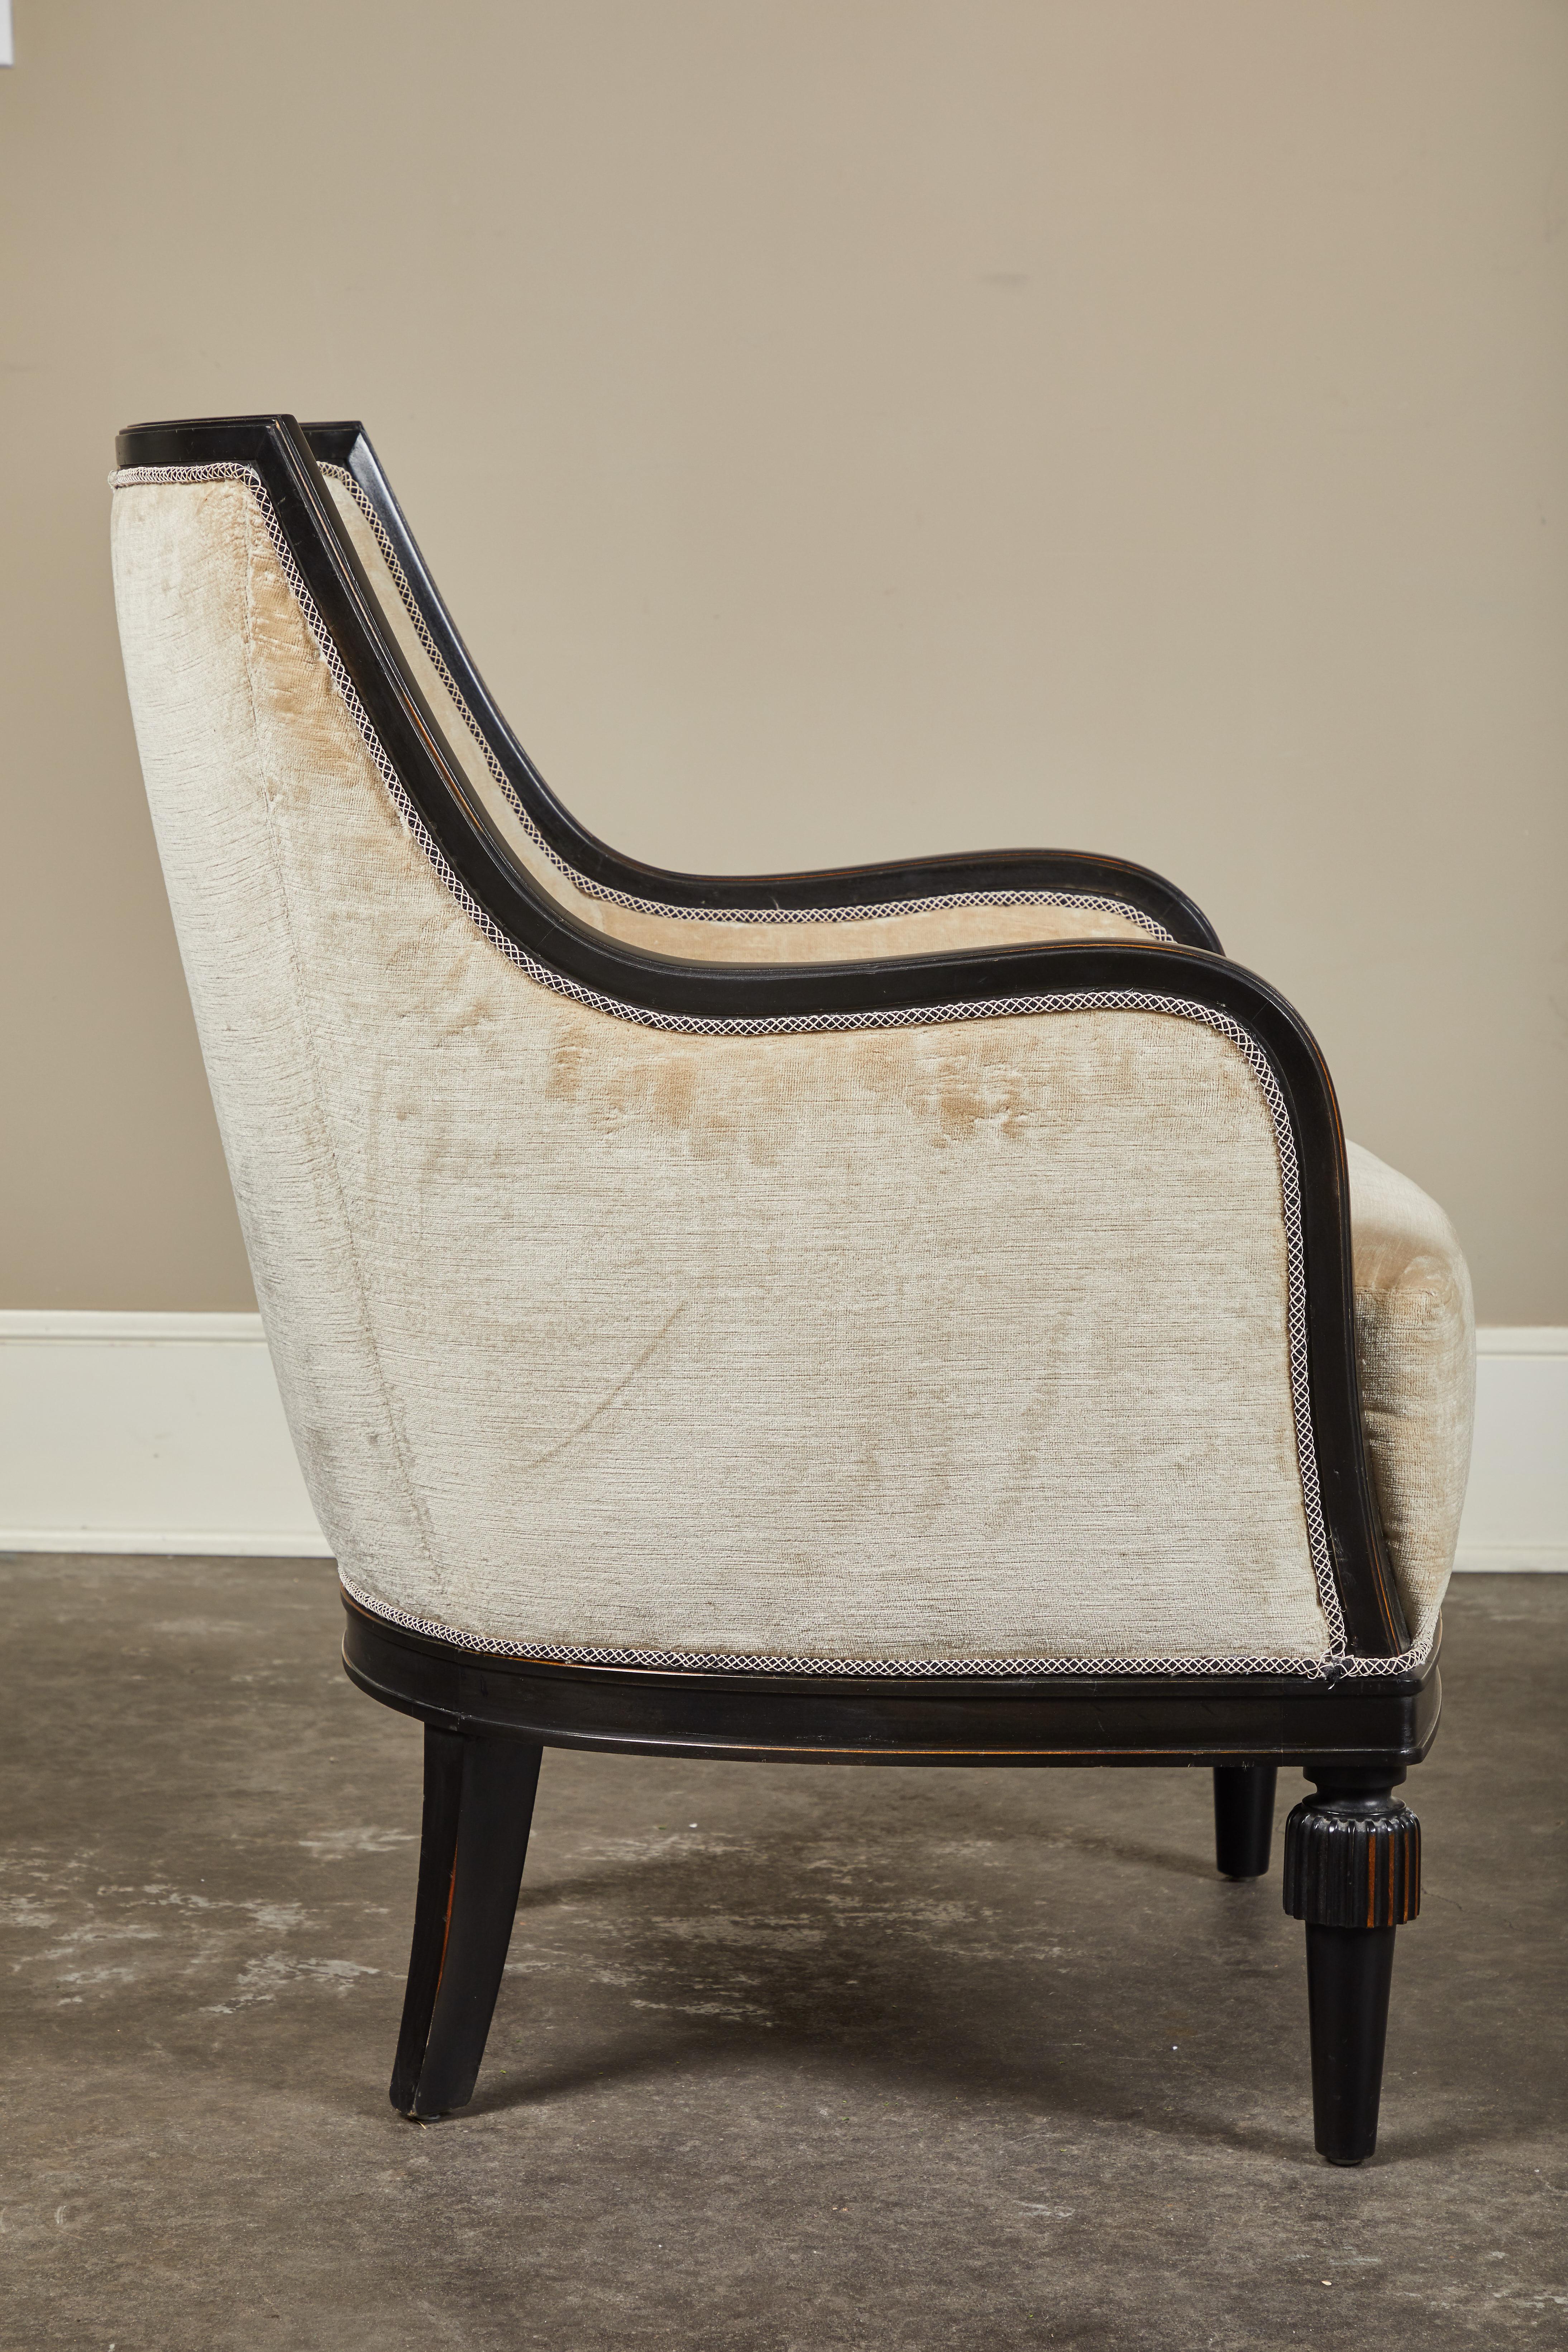 Our Victoria chair with tassel foot detailing in our ebonized finish with a light distress, inspired by an original Swedish 1930s Art Deco pair we found during our travels. Hardwood frame, 8 way hand-tied, COM, 8-10 week lead time.